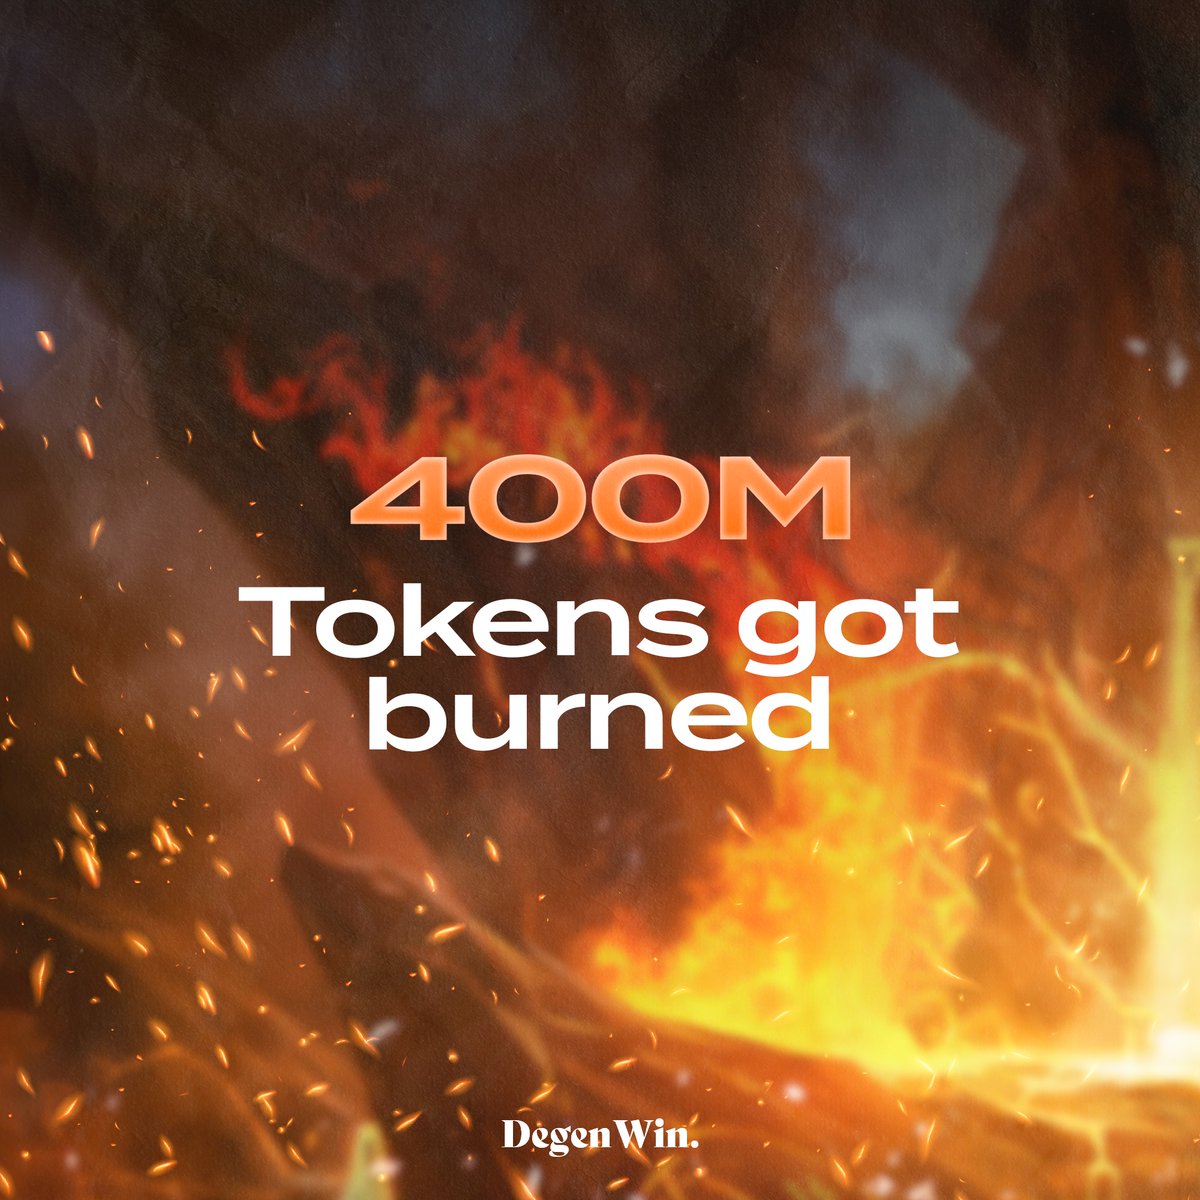 🔥 Exciting Announcement from #DegenWin! 🔥

🚀 Hey $DGW Fam! We've got some electrifying news to share: We've just burned a whopping 400 million tokens! That's a jaw-dropping 10% of our total supply gone in flames! 🚀

View the TX here 👇
bscscan.com/tx/0xa85c0366f…

There is more!